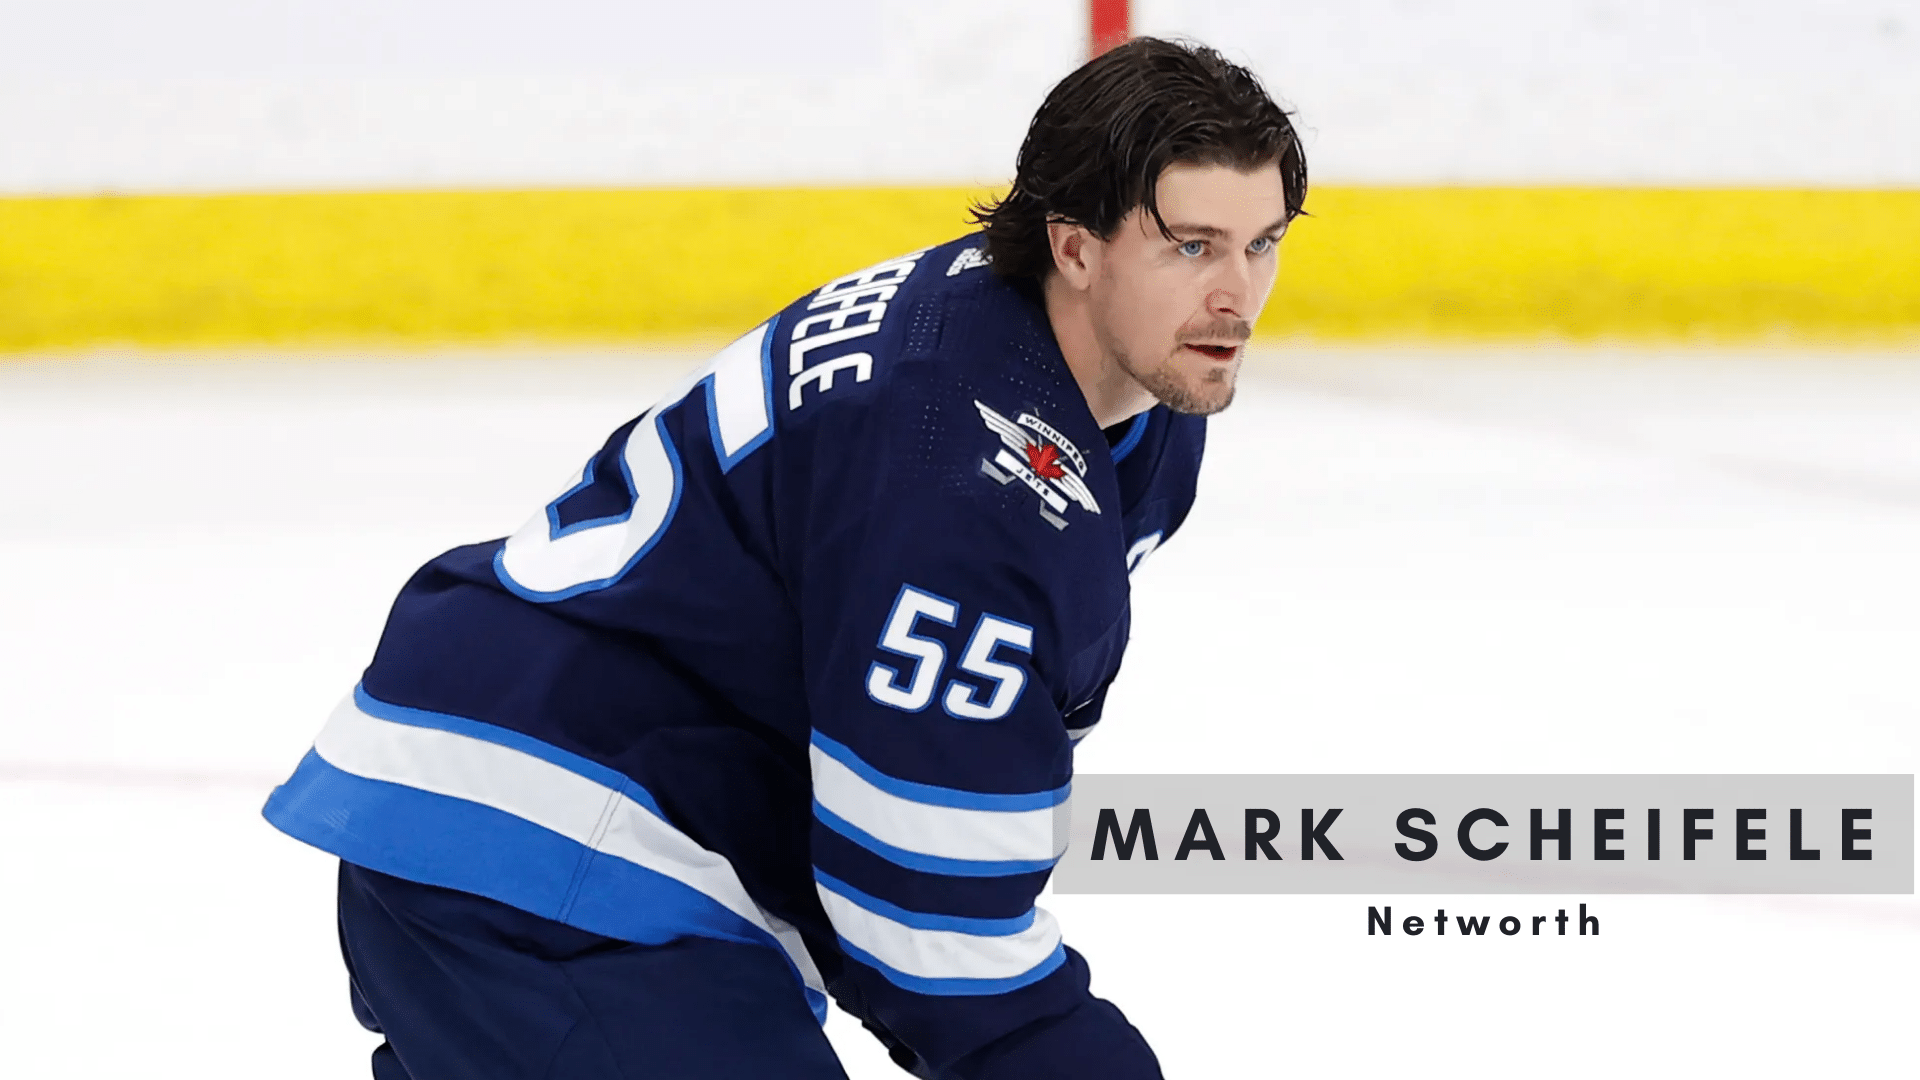 Who is Mark Scheifele's girlfriend? Know all about Dara Howell